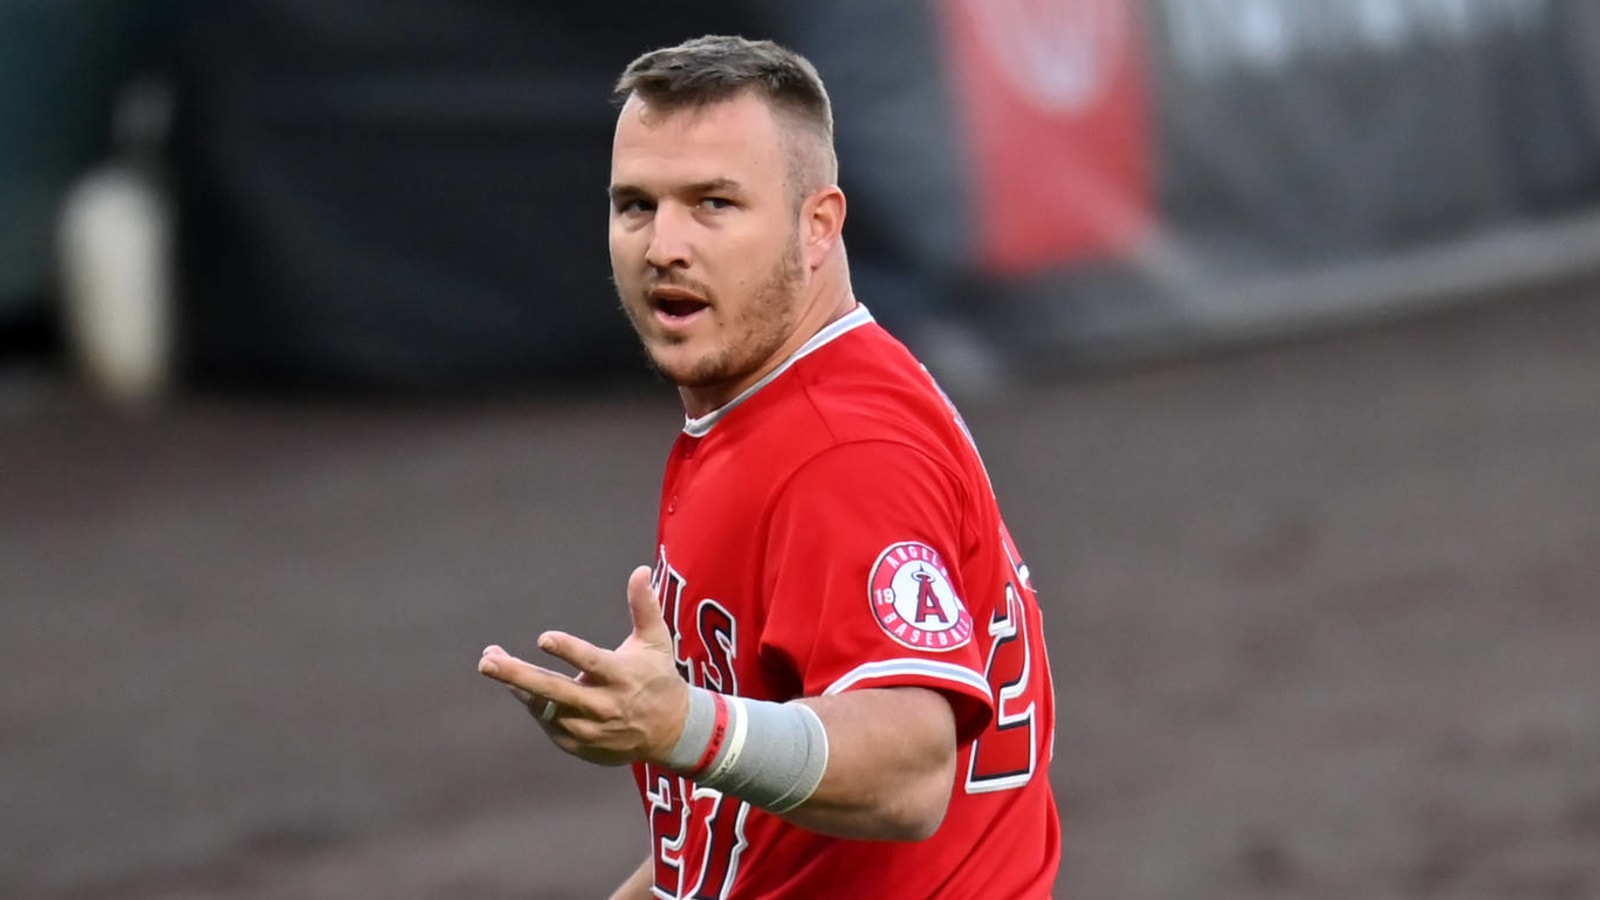 Mike Trout jersey expected to fetch at least $1M at auction